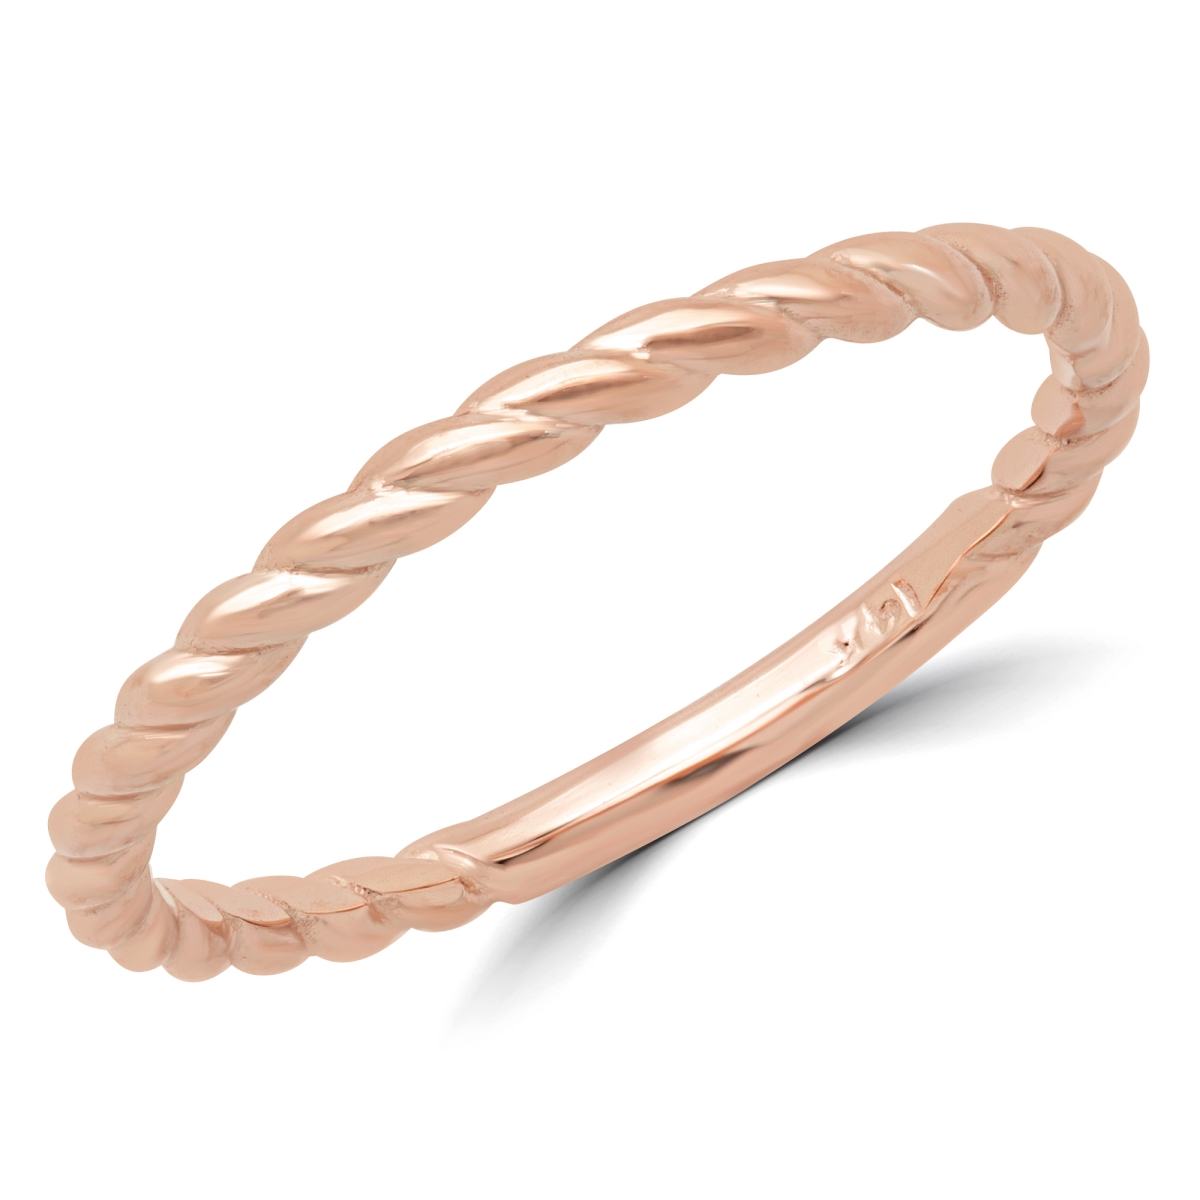 Picture of Majesty Diamonds MD180603-4.25 Braided Rope Classic Wedding Band Ring in 14K Rose Gold - Size 4.25